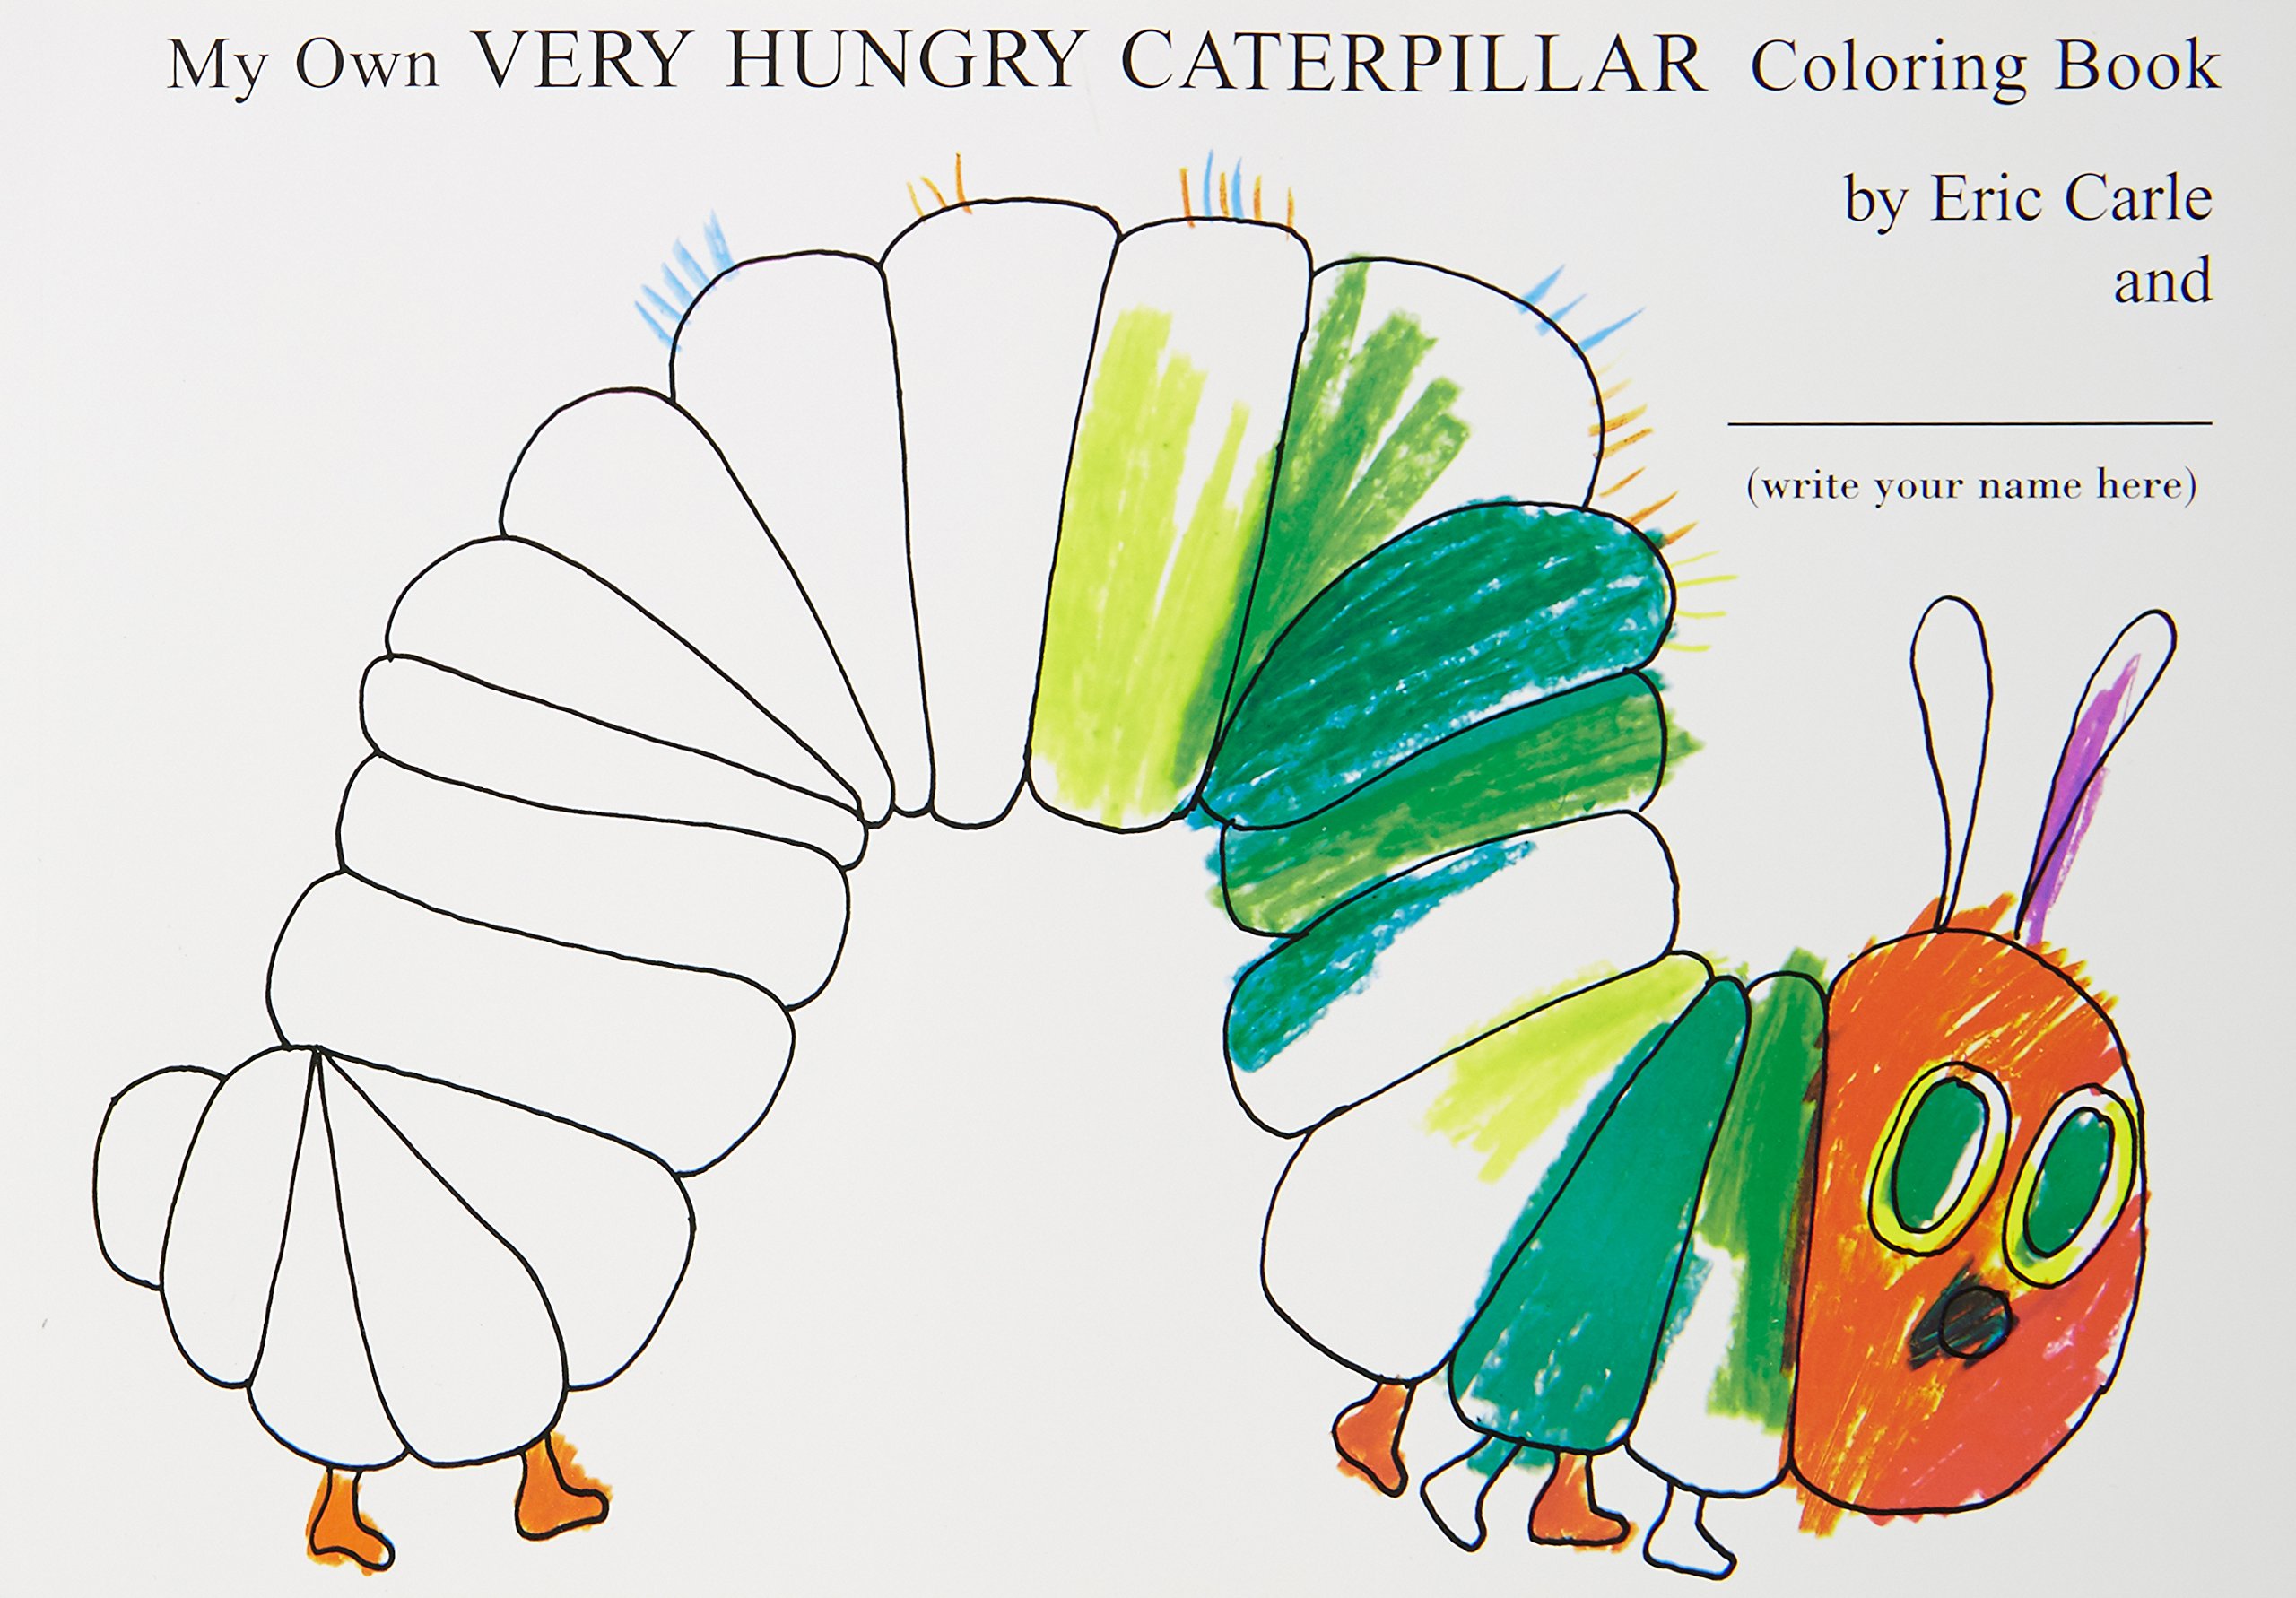 Carle Eric My Own Very Hungry Caterpillar. Coloring Book 